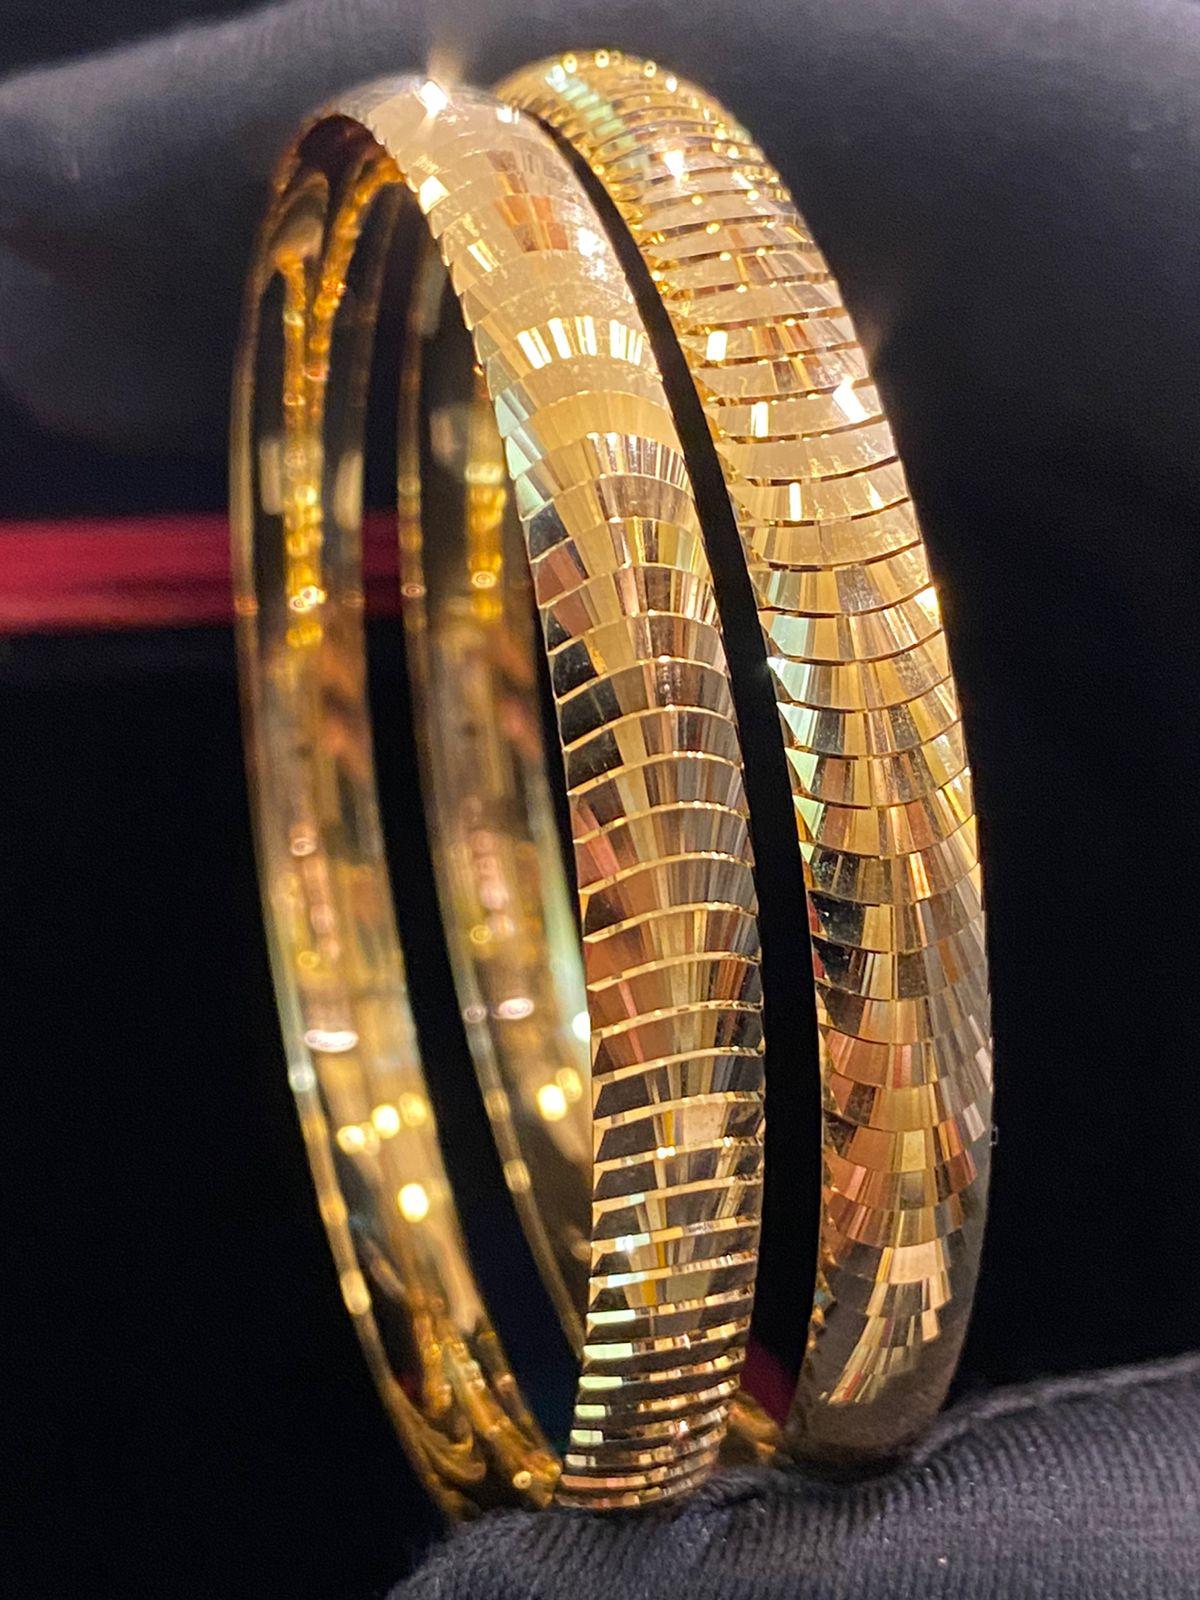 An exquisite design in 22K gold for this gorgeous bracelet.
Handcrafted by artisan goldsmith.
Excellent manufacture and quality.
Weight 30 gr.
Circumference 18 cm.